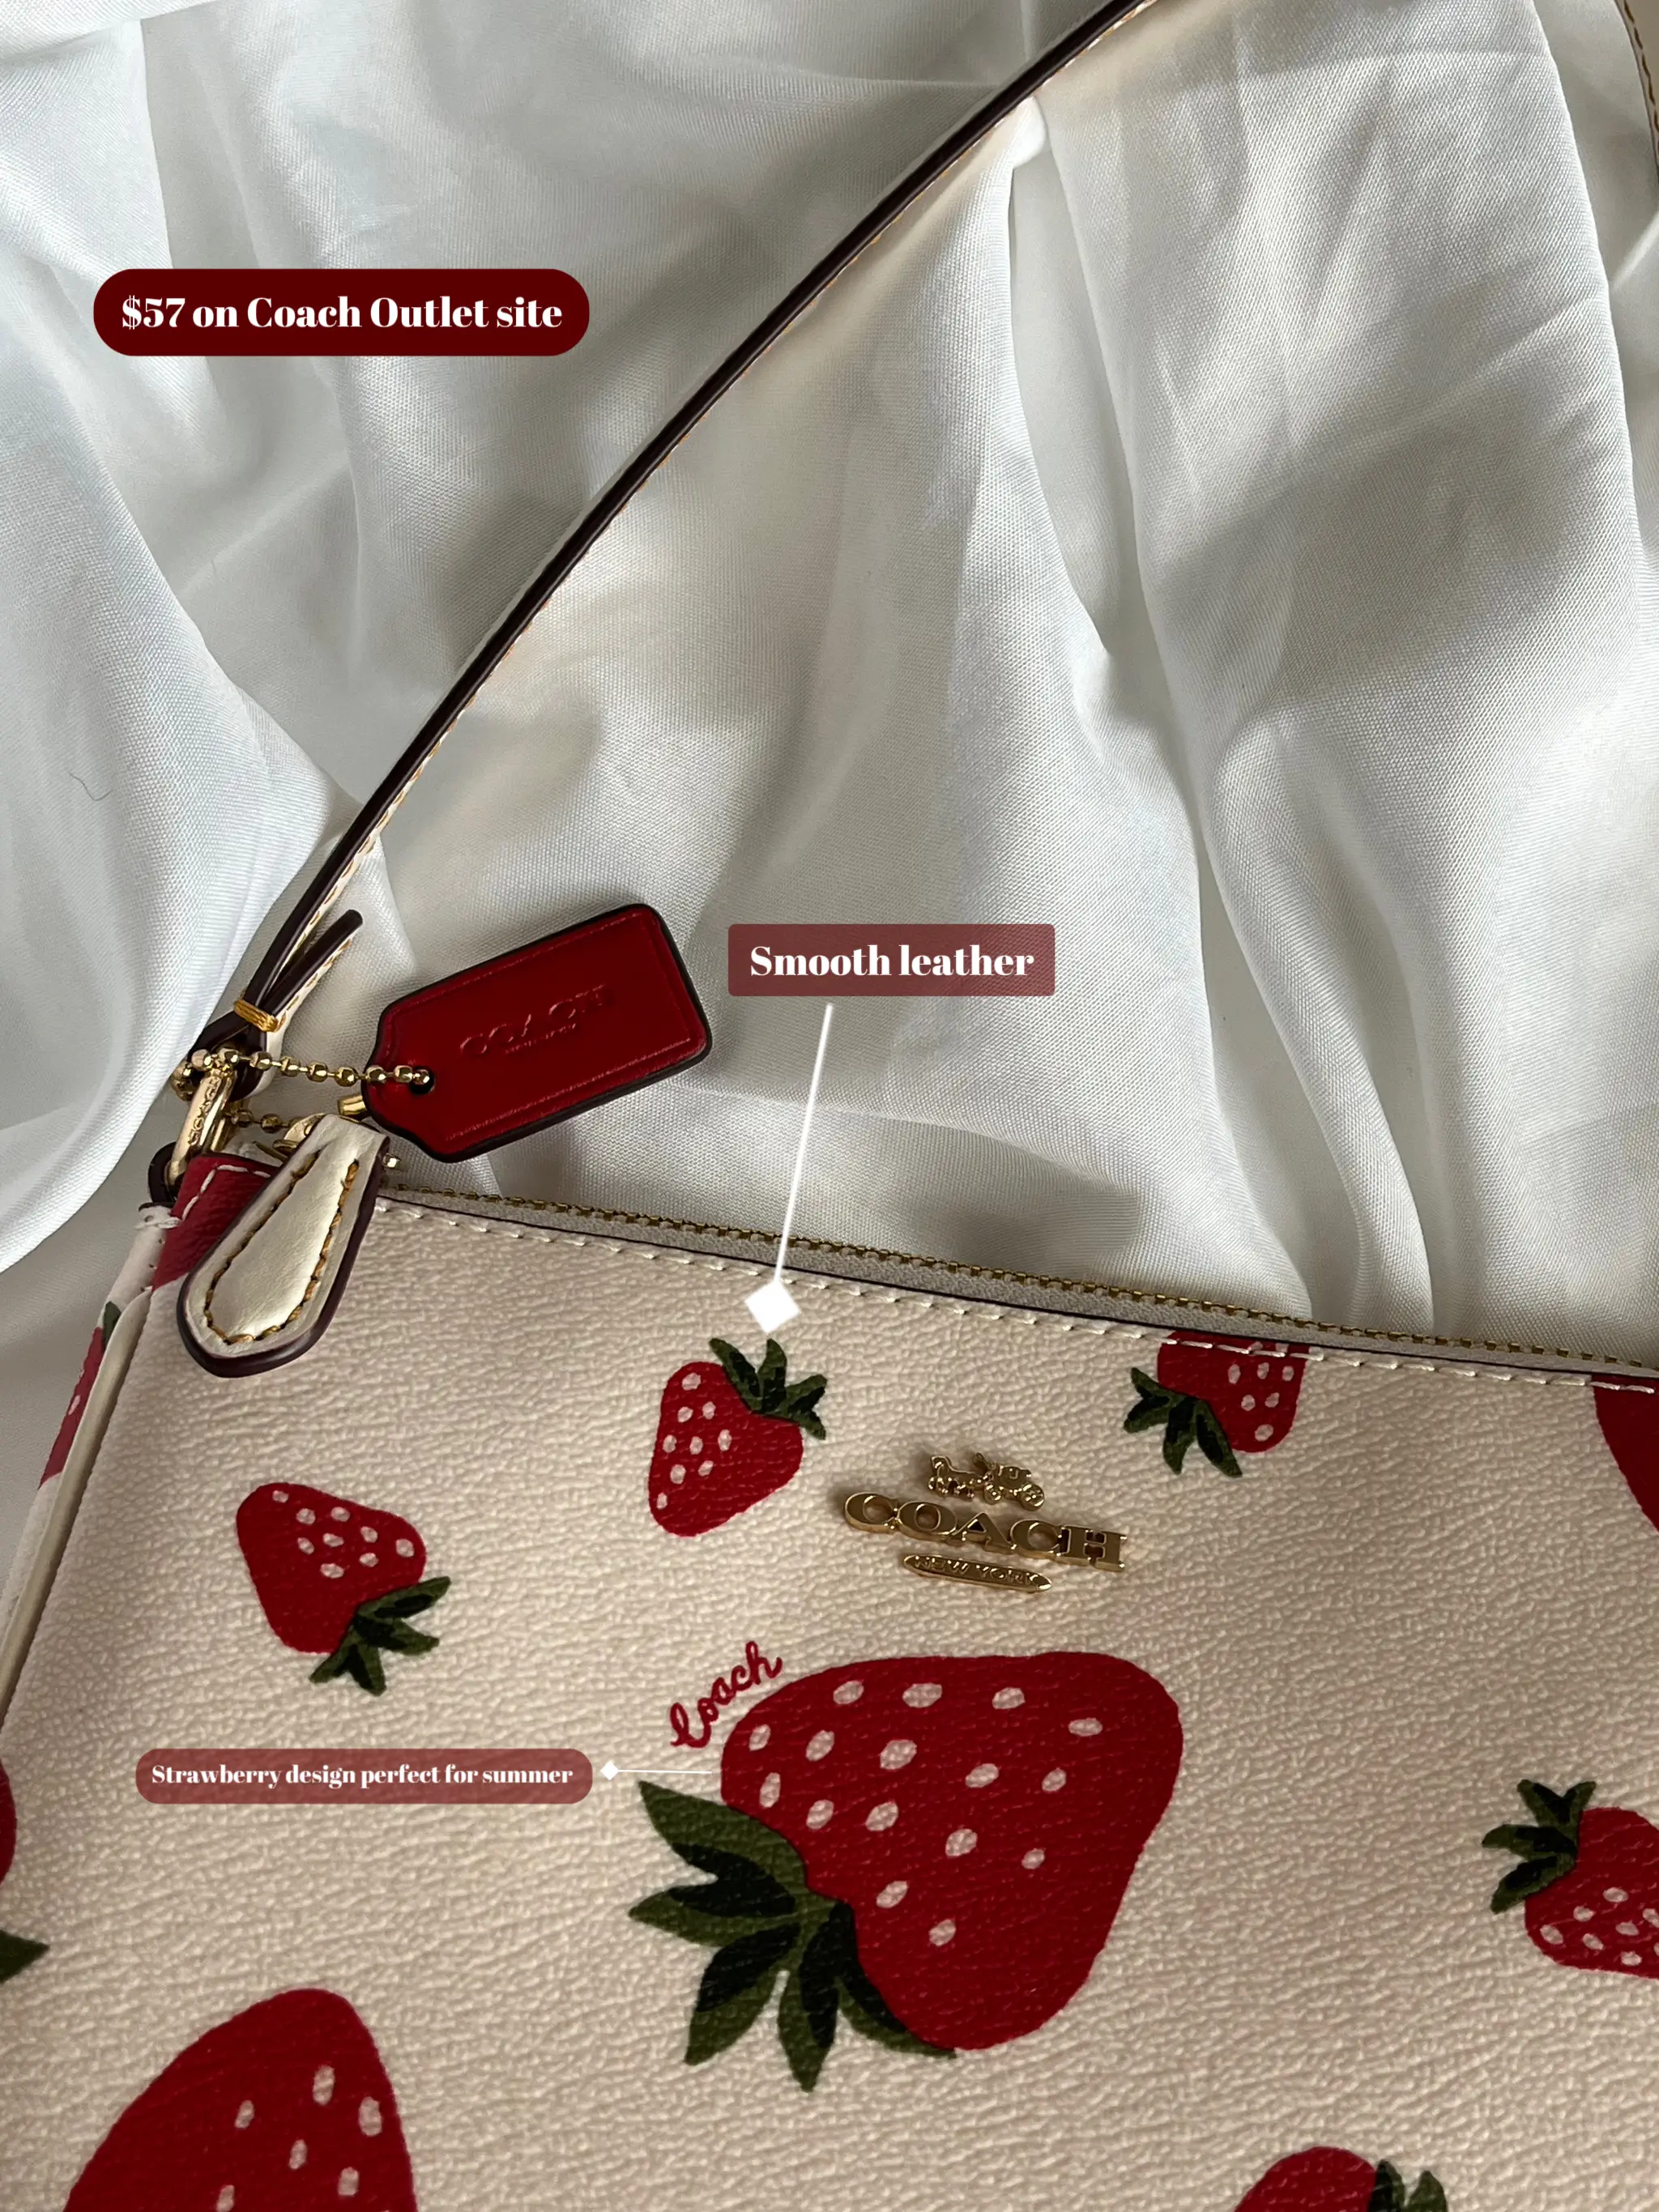 NEW Coach Outlet Bags PERFECT For Spring and Summer! + Unboxing/Mini Haul!  